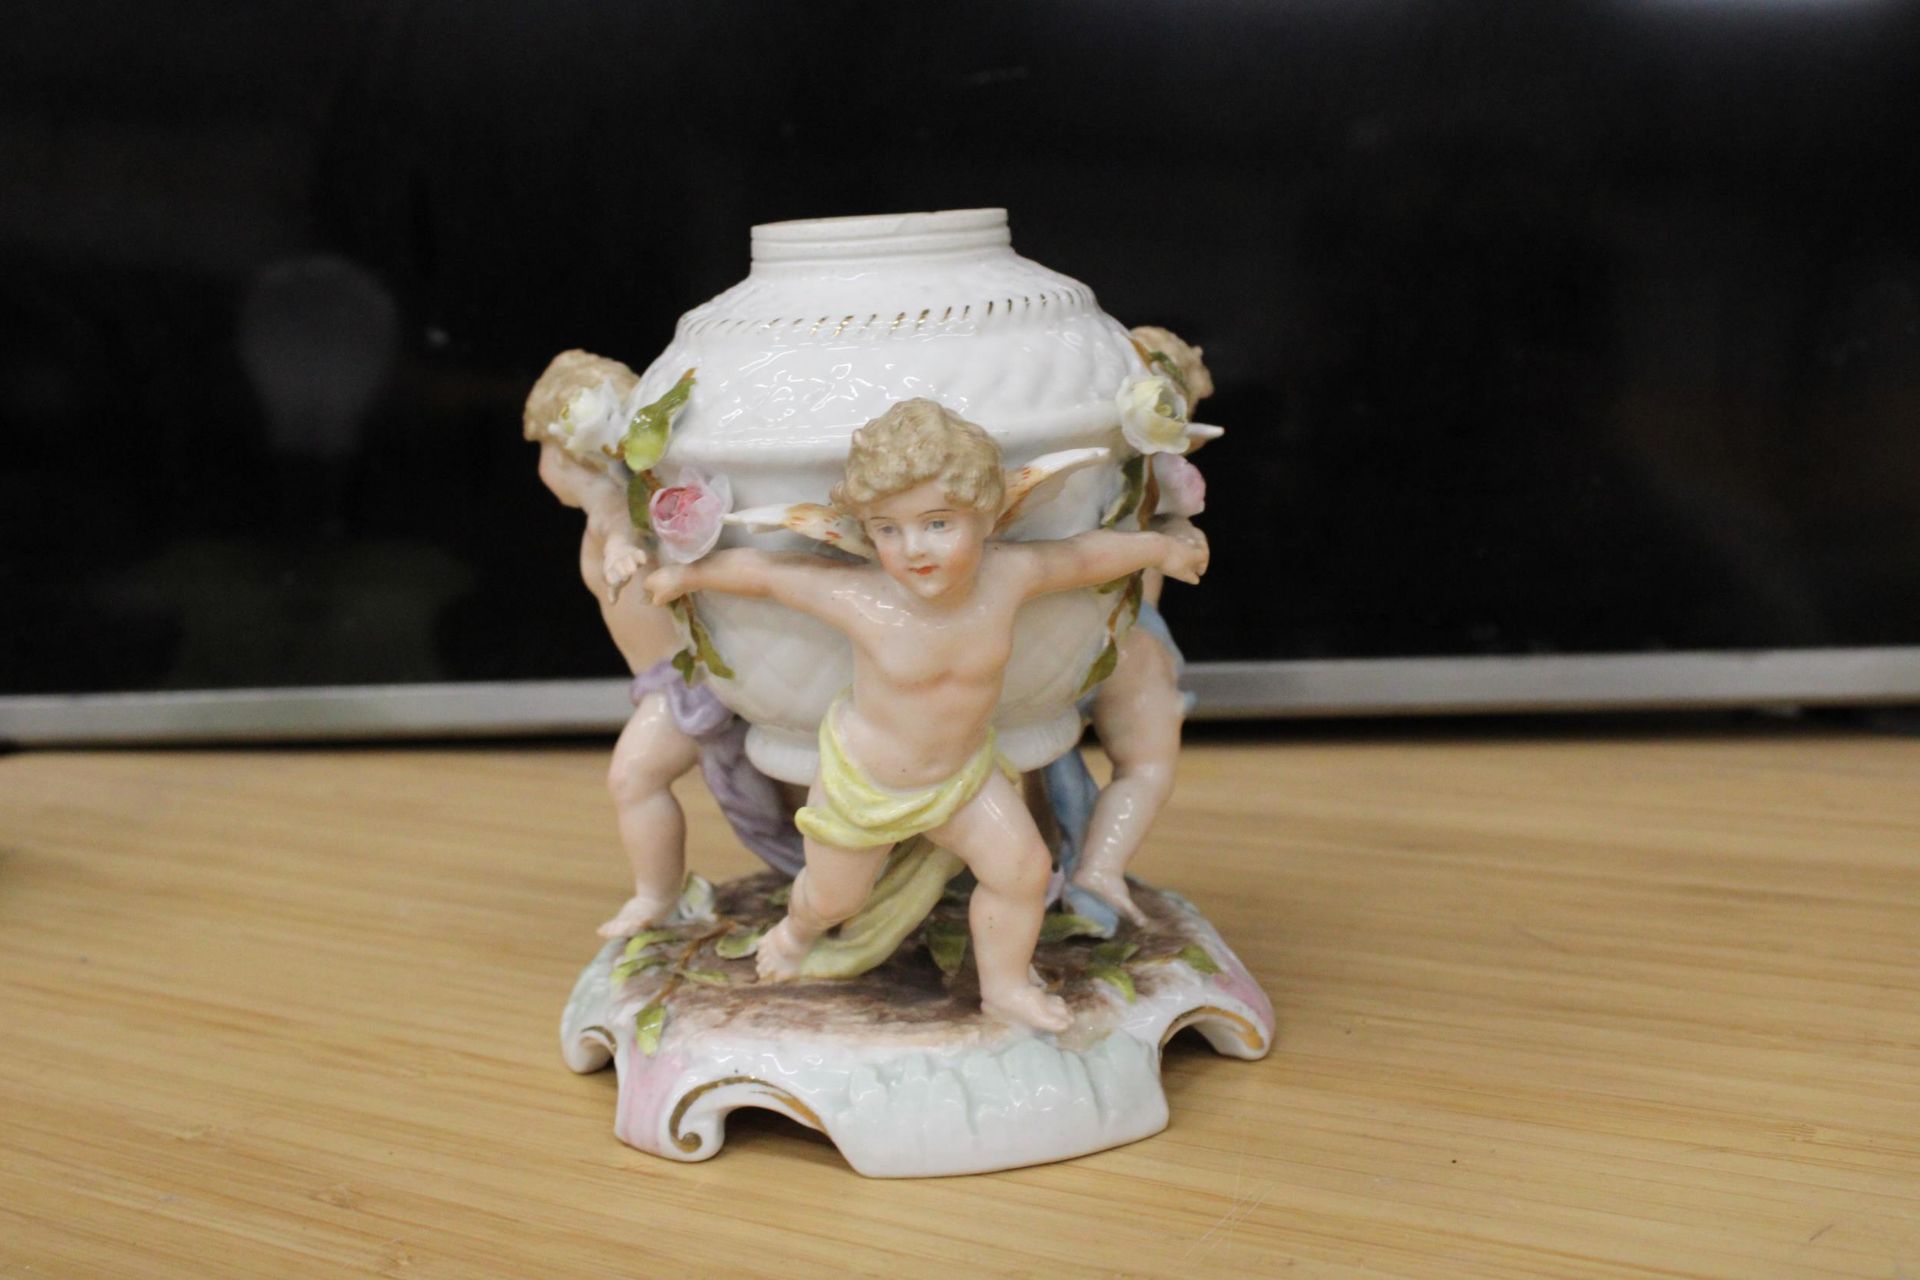 A MEISSEN STYLE PORCELAIN OIL LAMP BASE IN THE FORM OF CHERUBS - Image 3 of 5